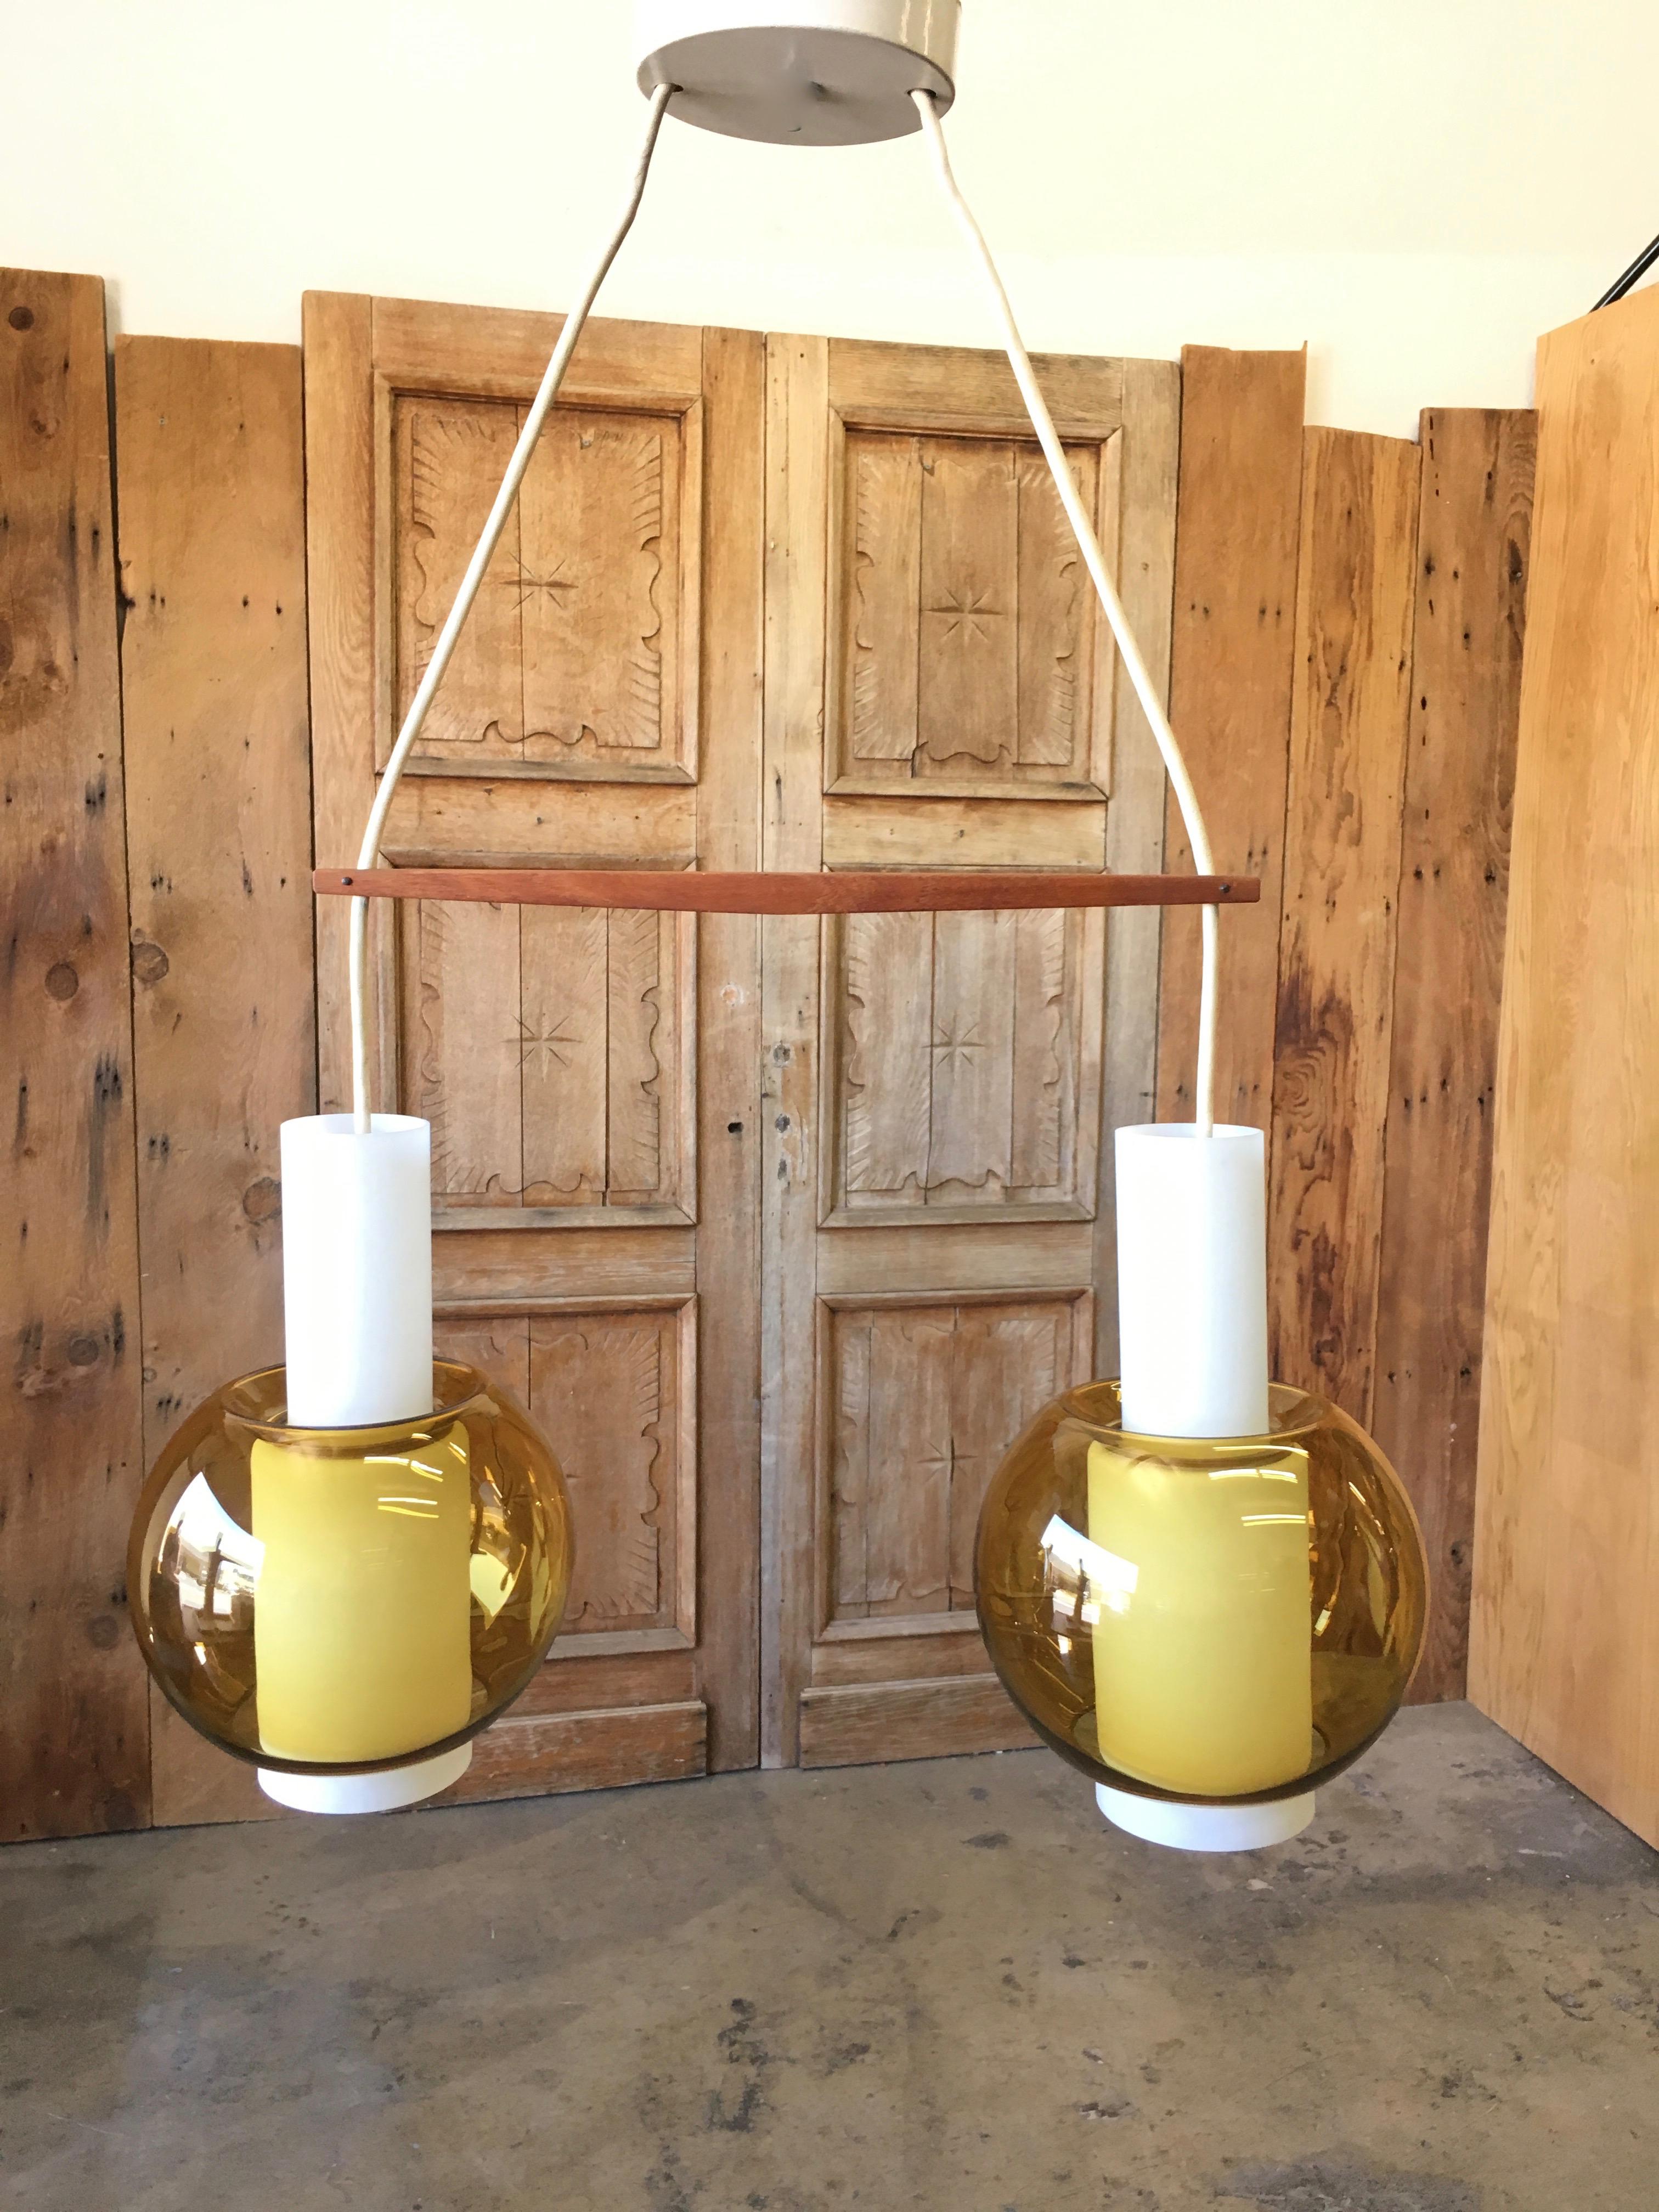 Two-piece frosted glass with golden yellow round globe and adjustable teak bar chandelier made by Nordisk Solar distributed by Presco Lite.